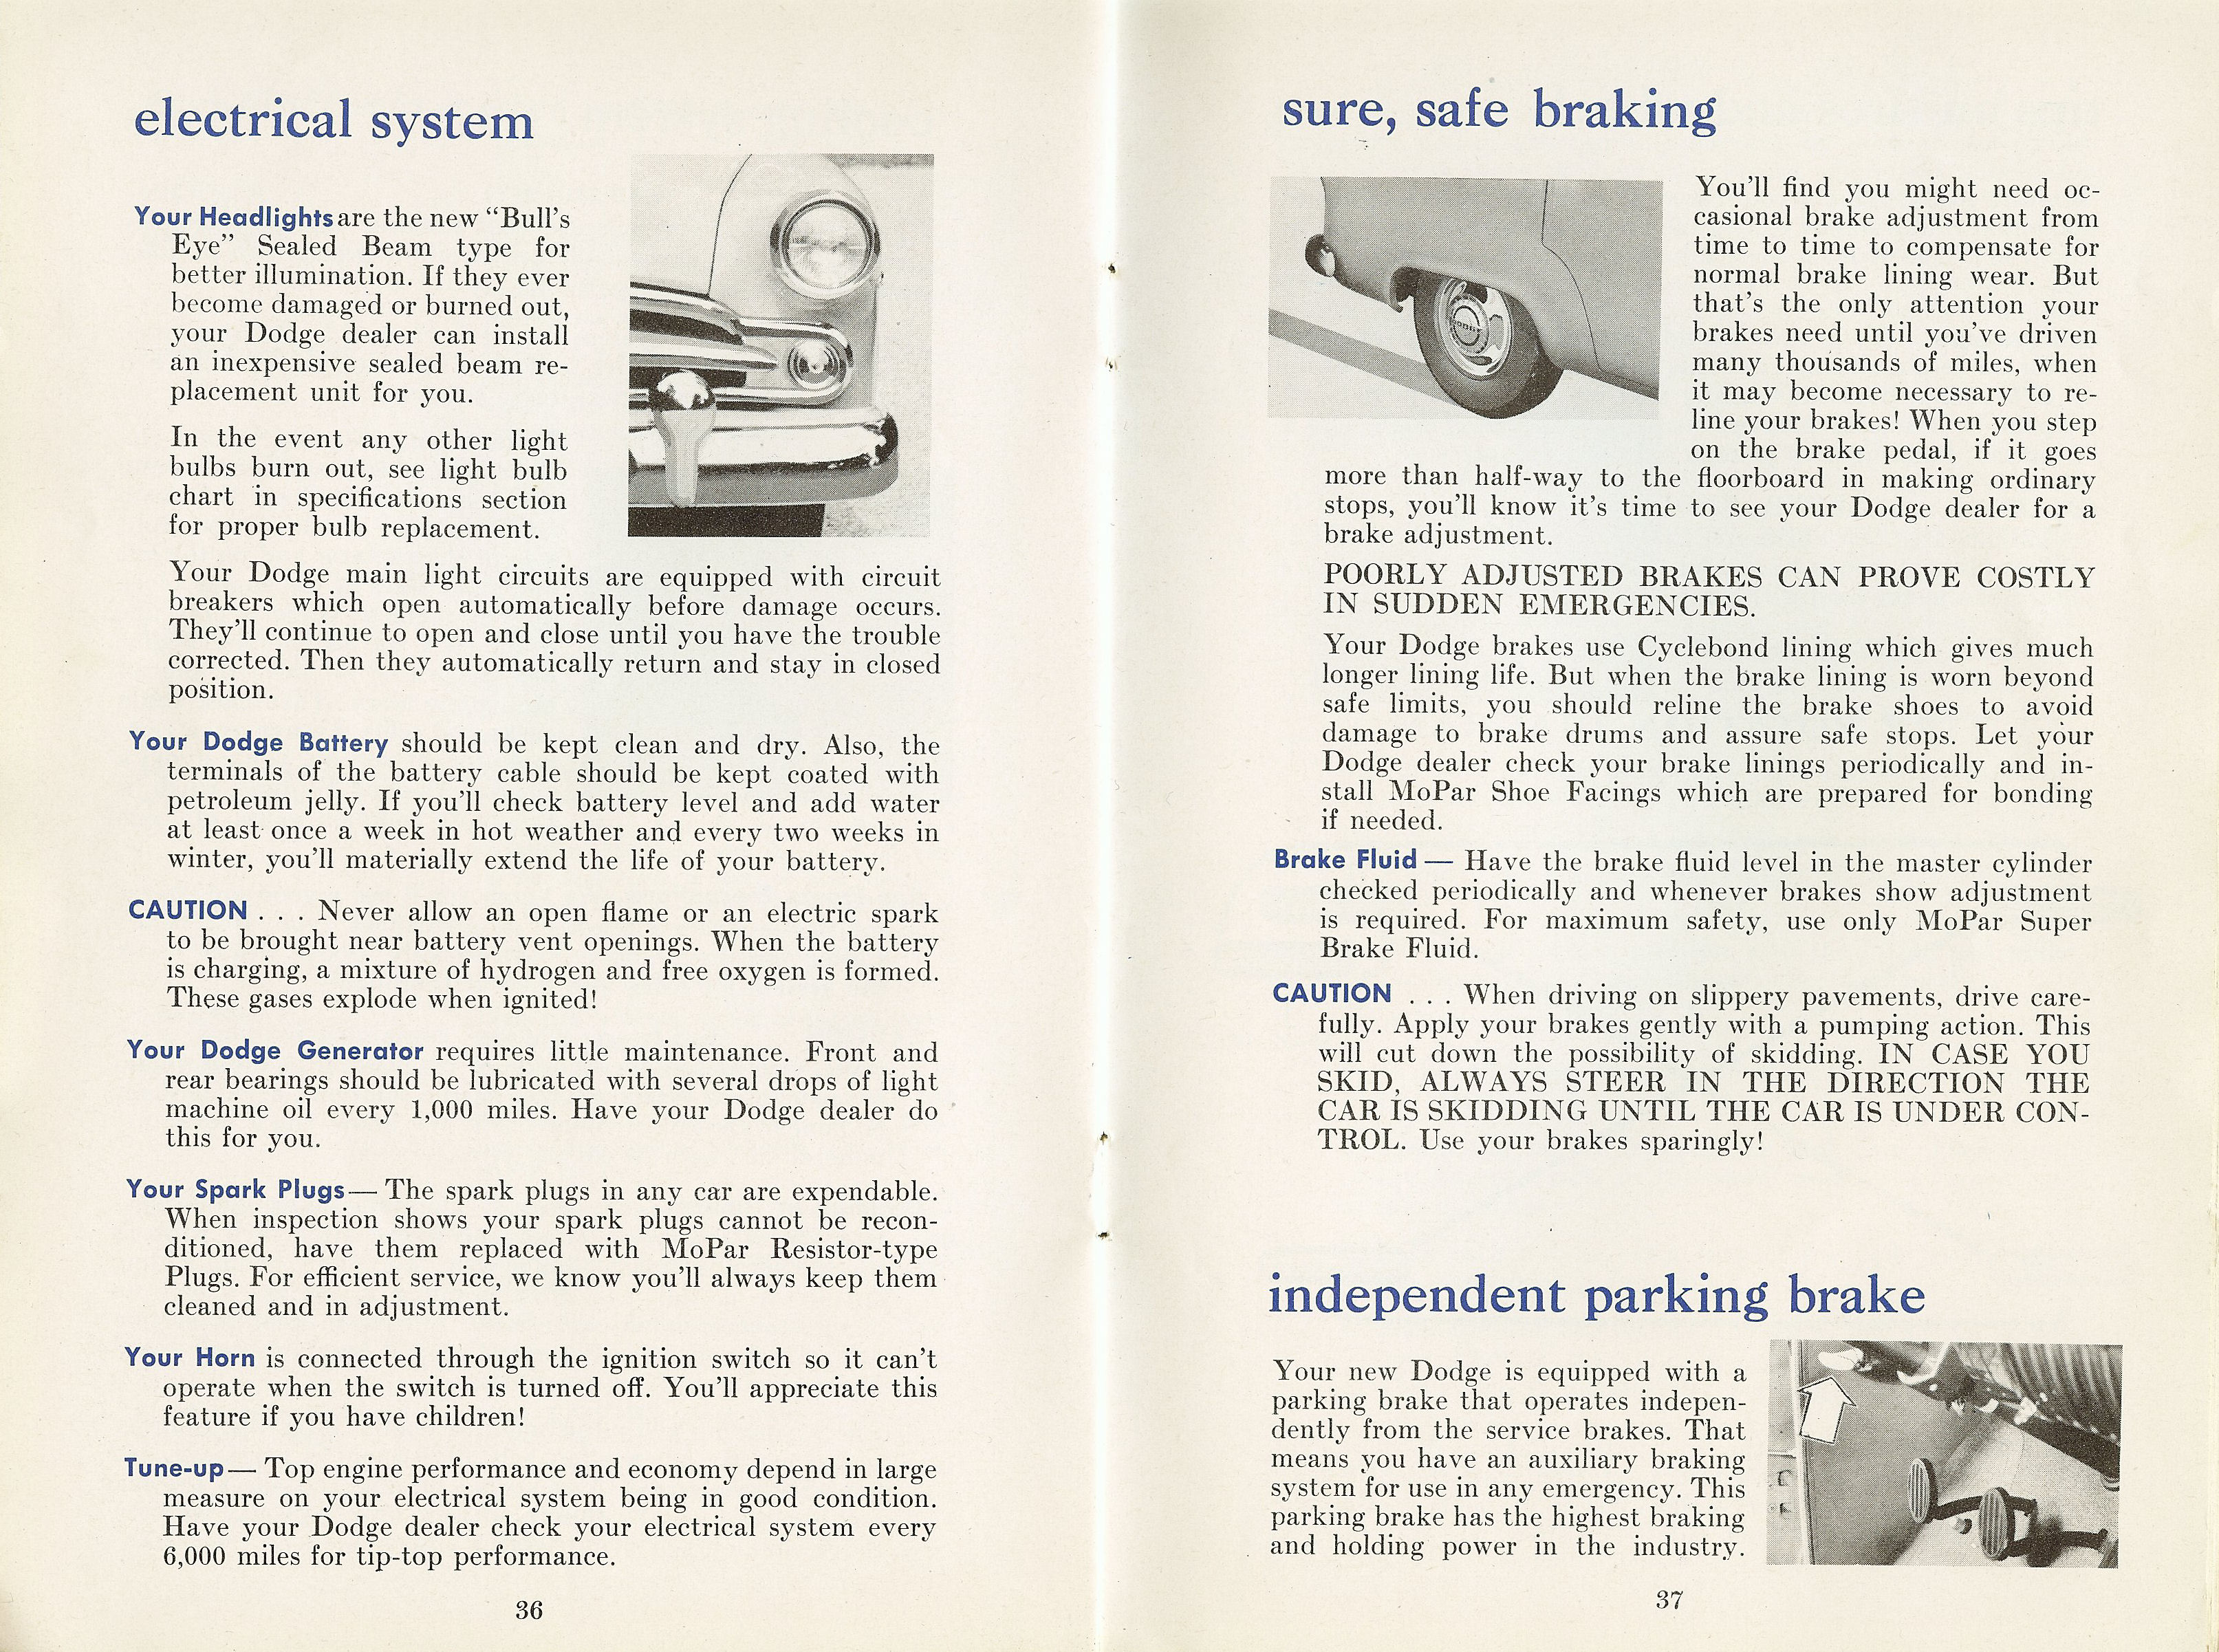 1954 Dodge Car Owners Manual Page 6